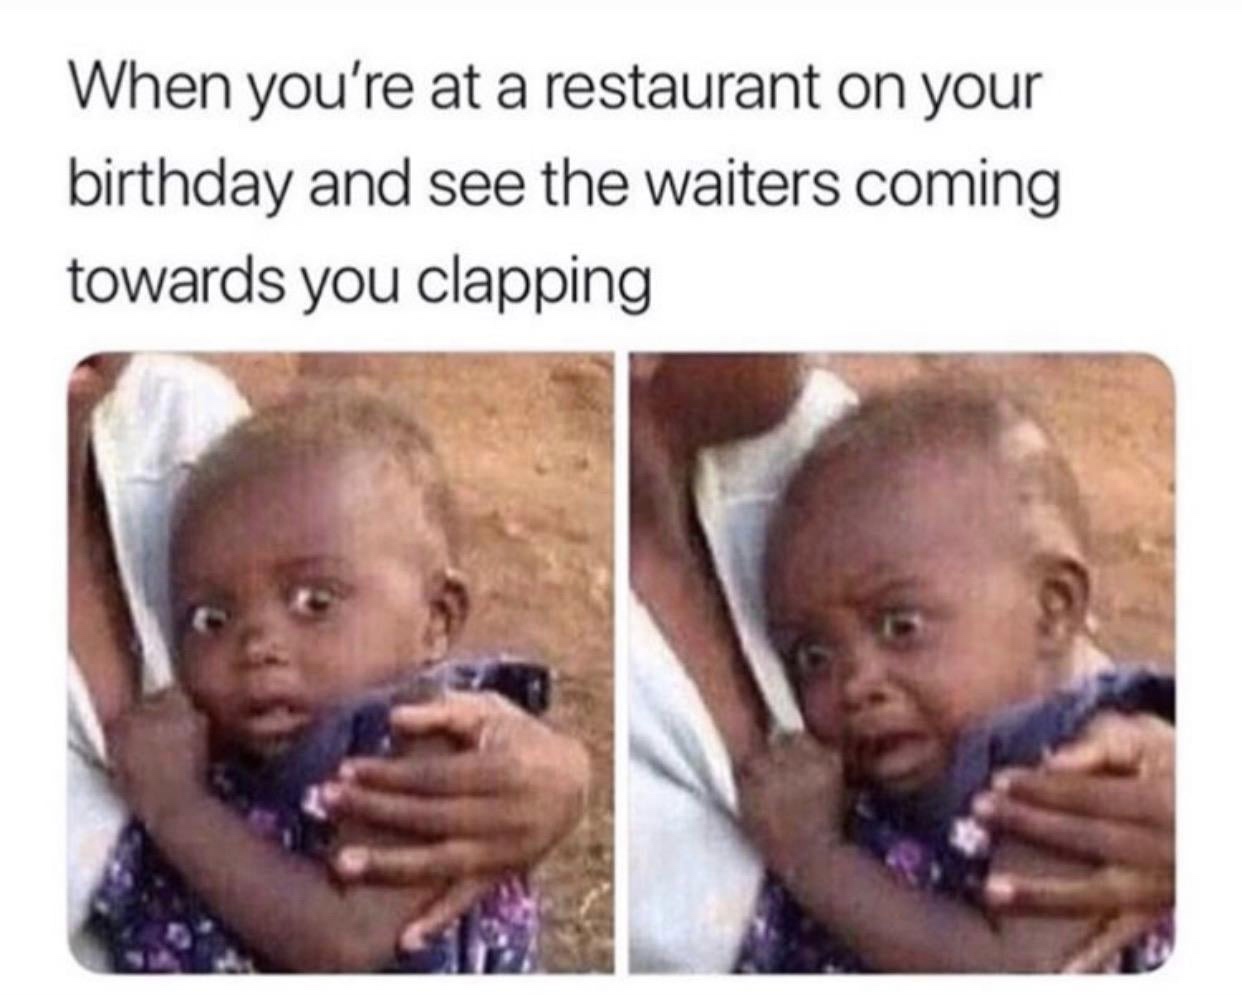 worldstar meme - When you're at a restaurant on your birthday and see the waiters coming towards you clapping